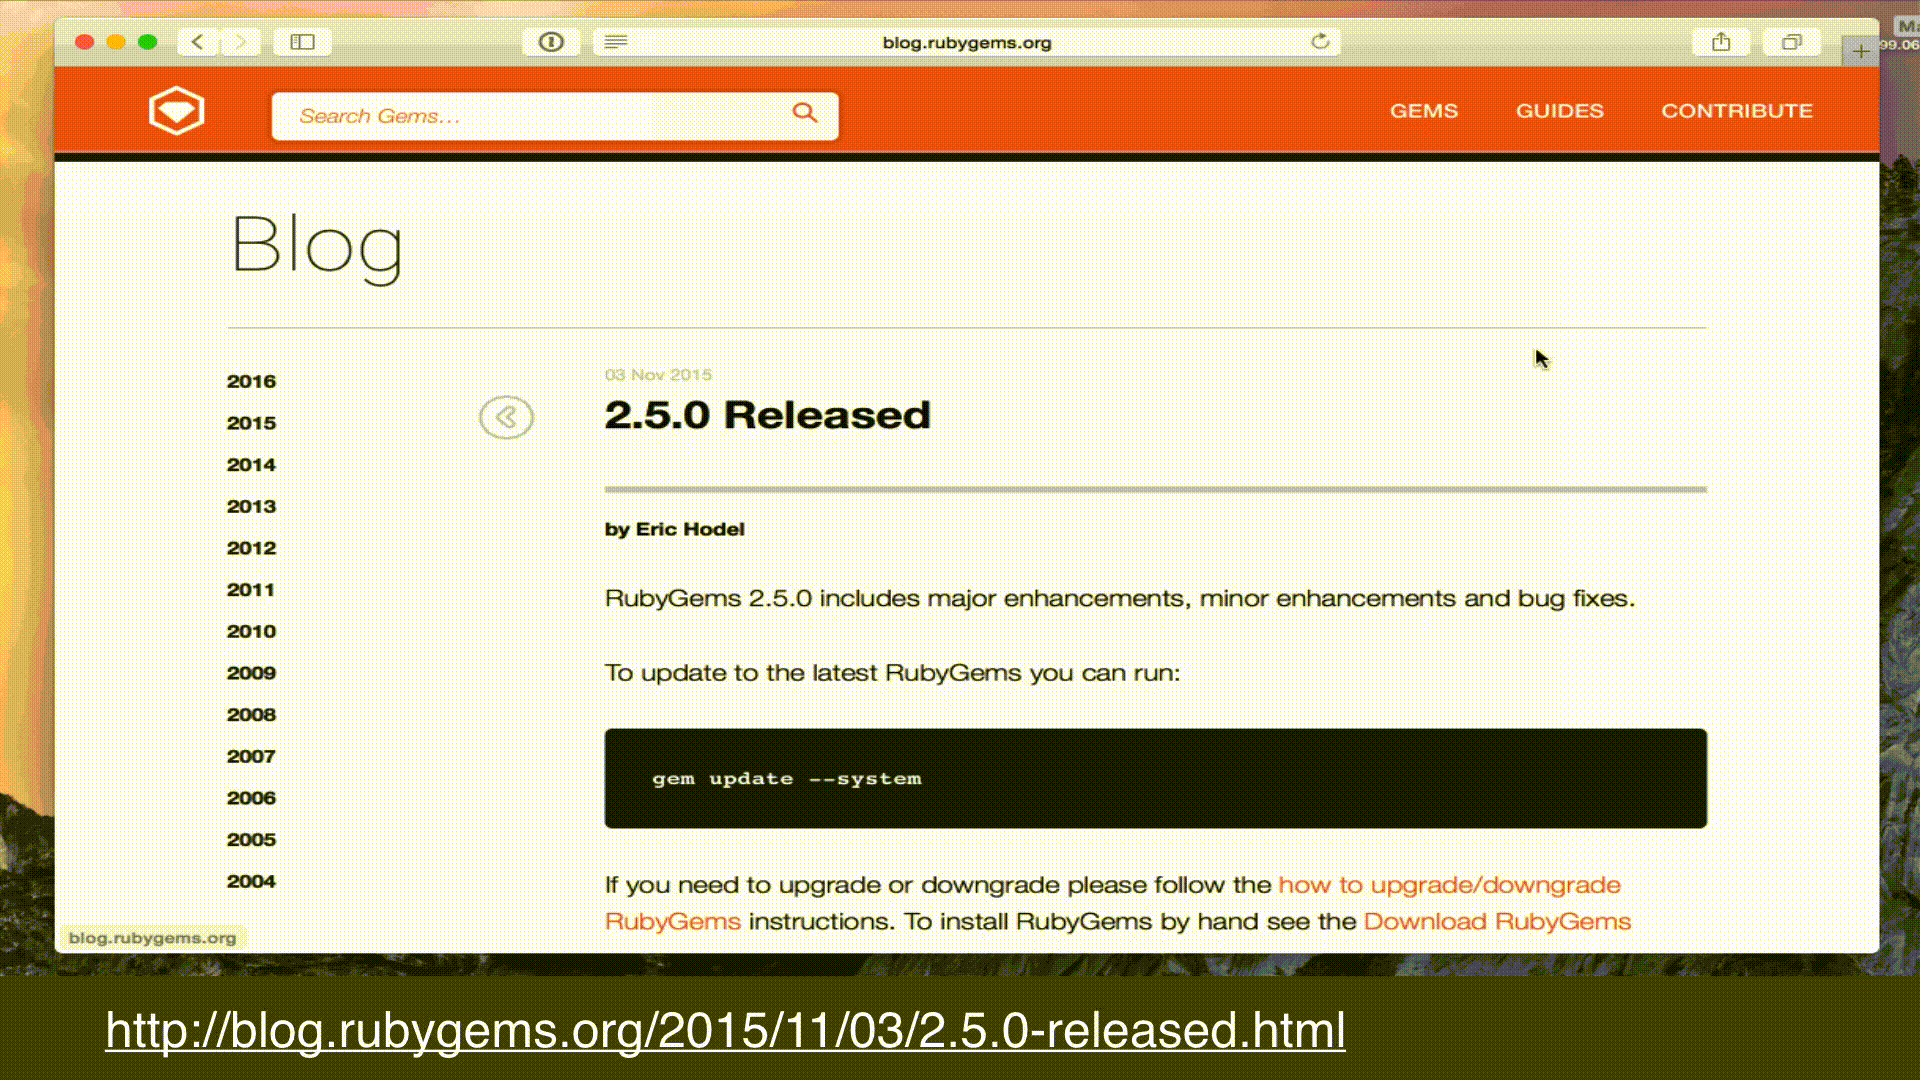 An animated screenshot of the rubygems 2.5 announcement blog post, showing me searching for my name - text: http://blog.rubygems.org/2015/11/03/2.5.0-released.html